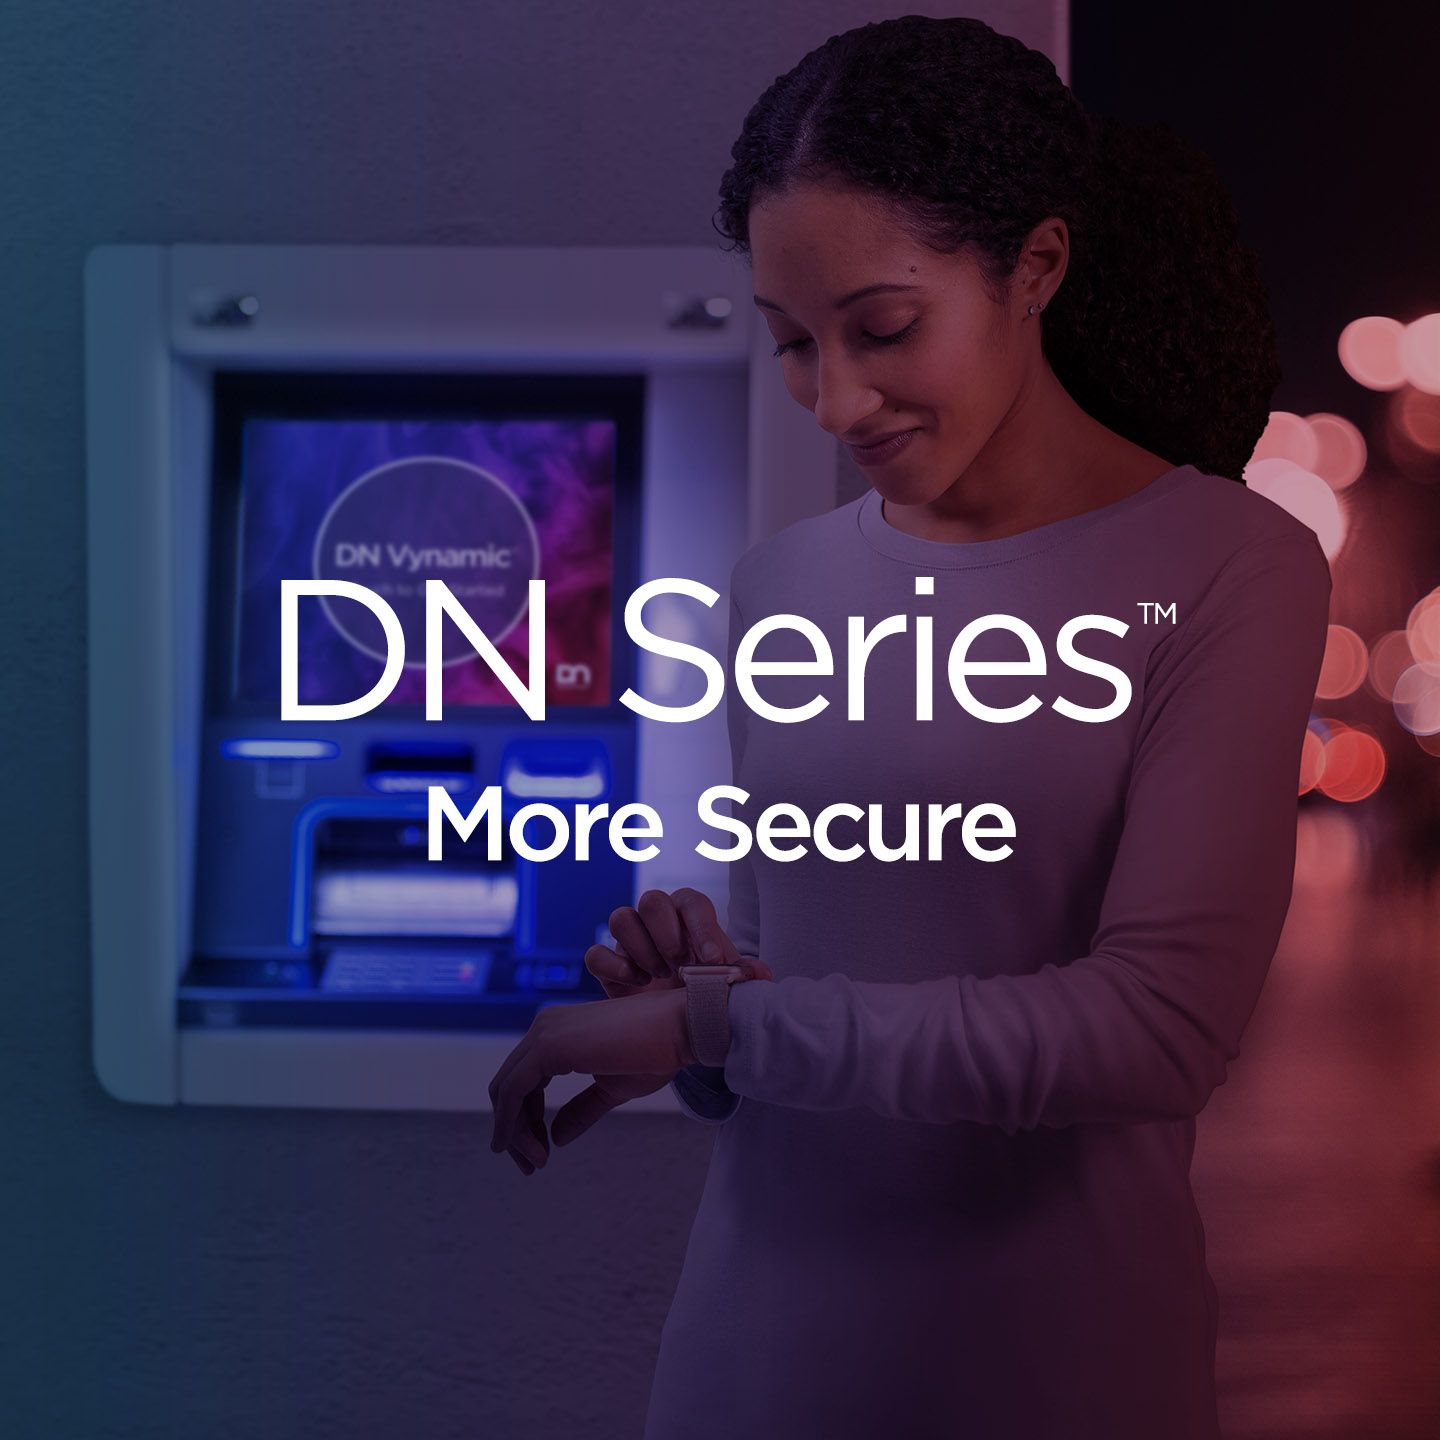 DN Series More Secure